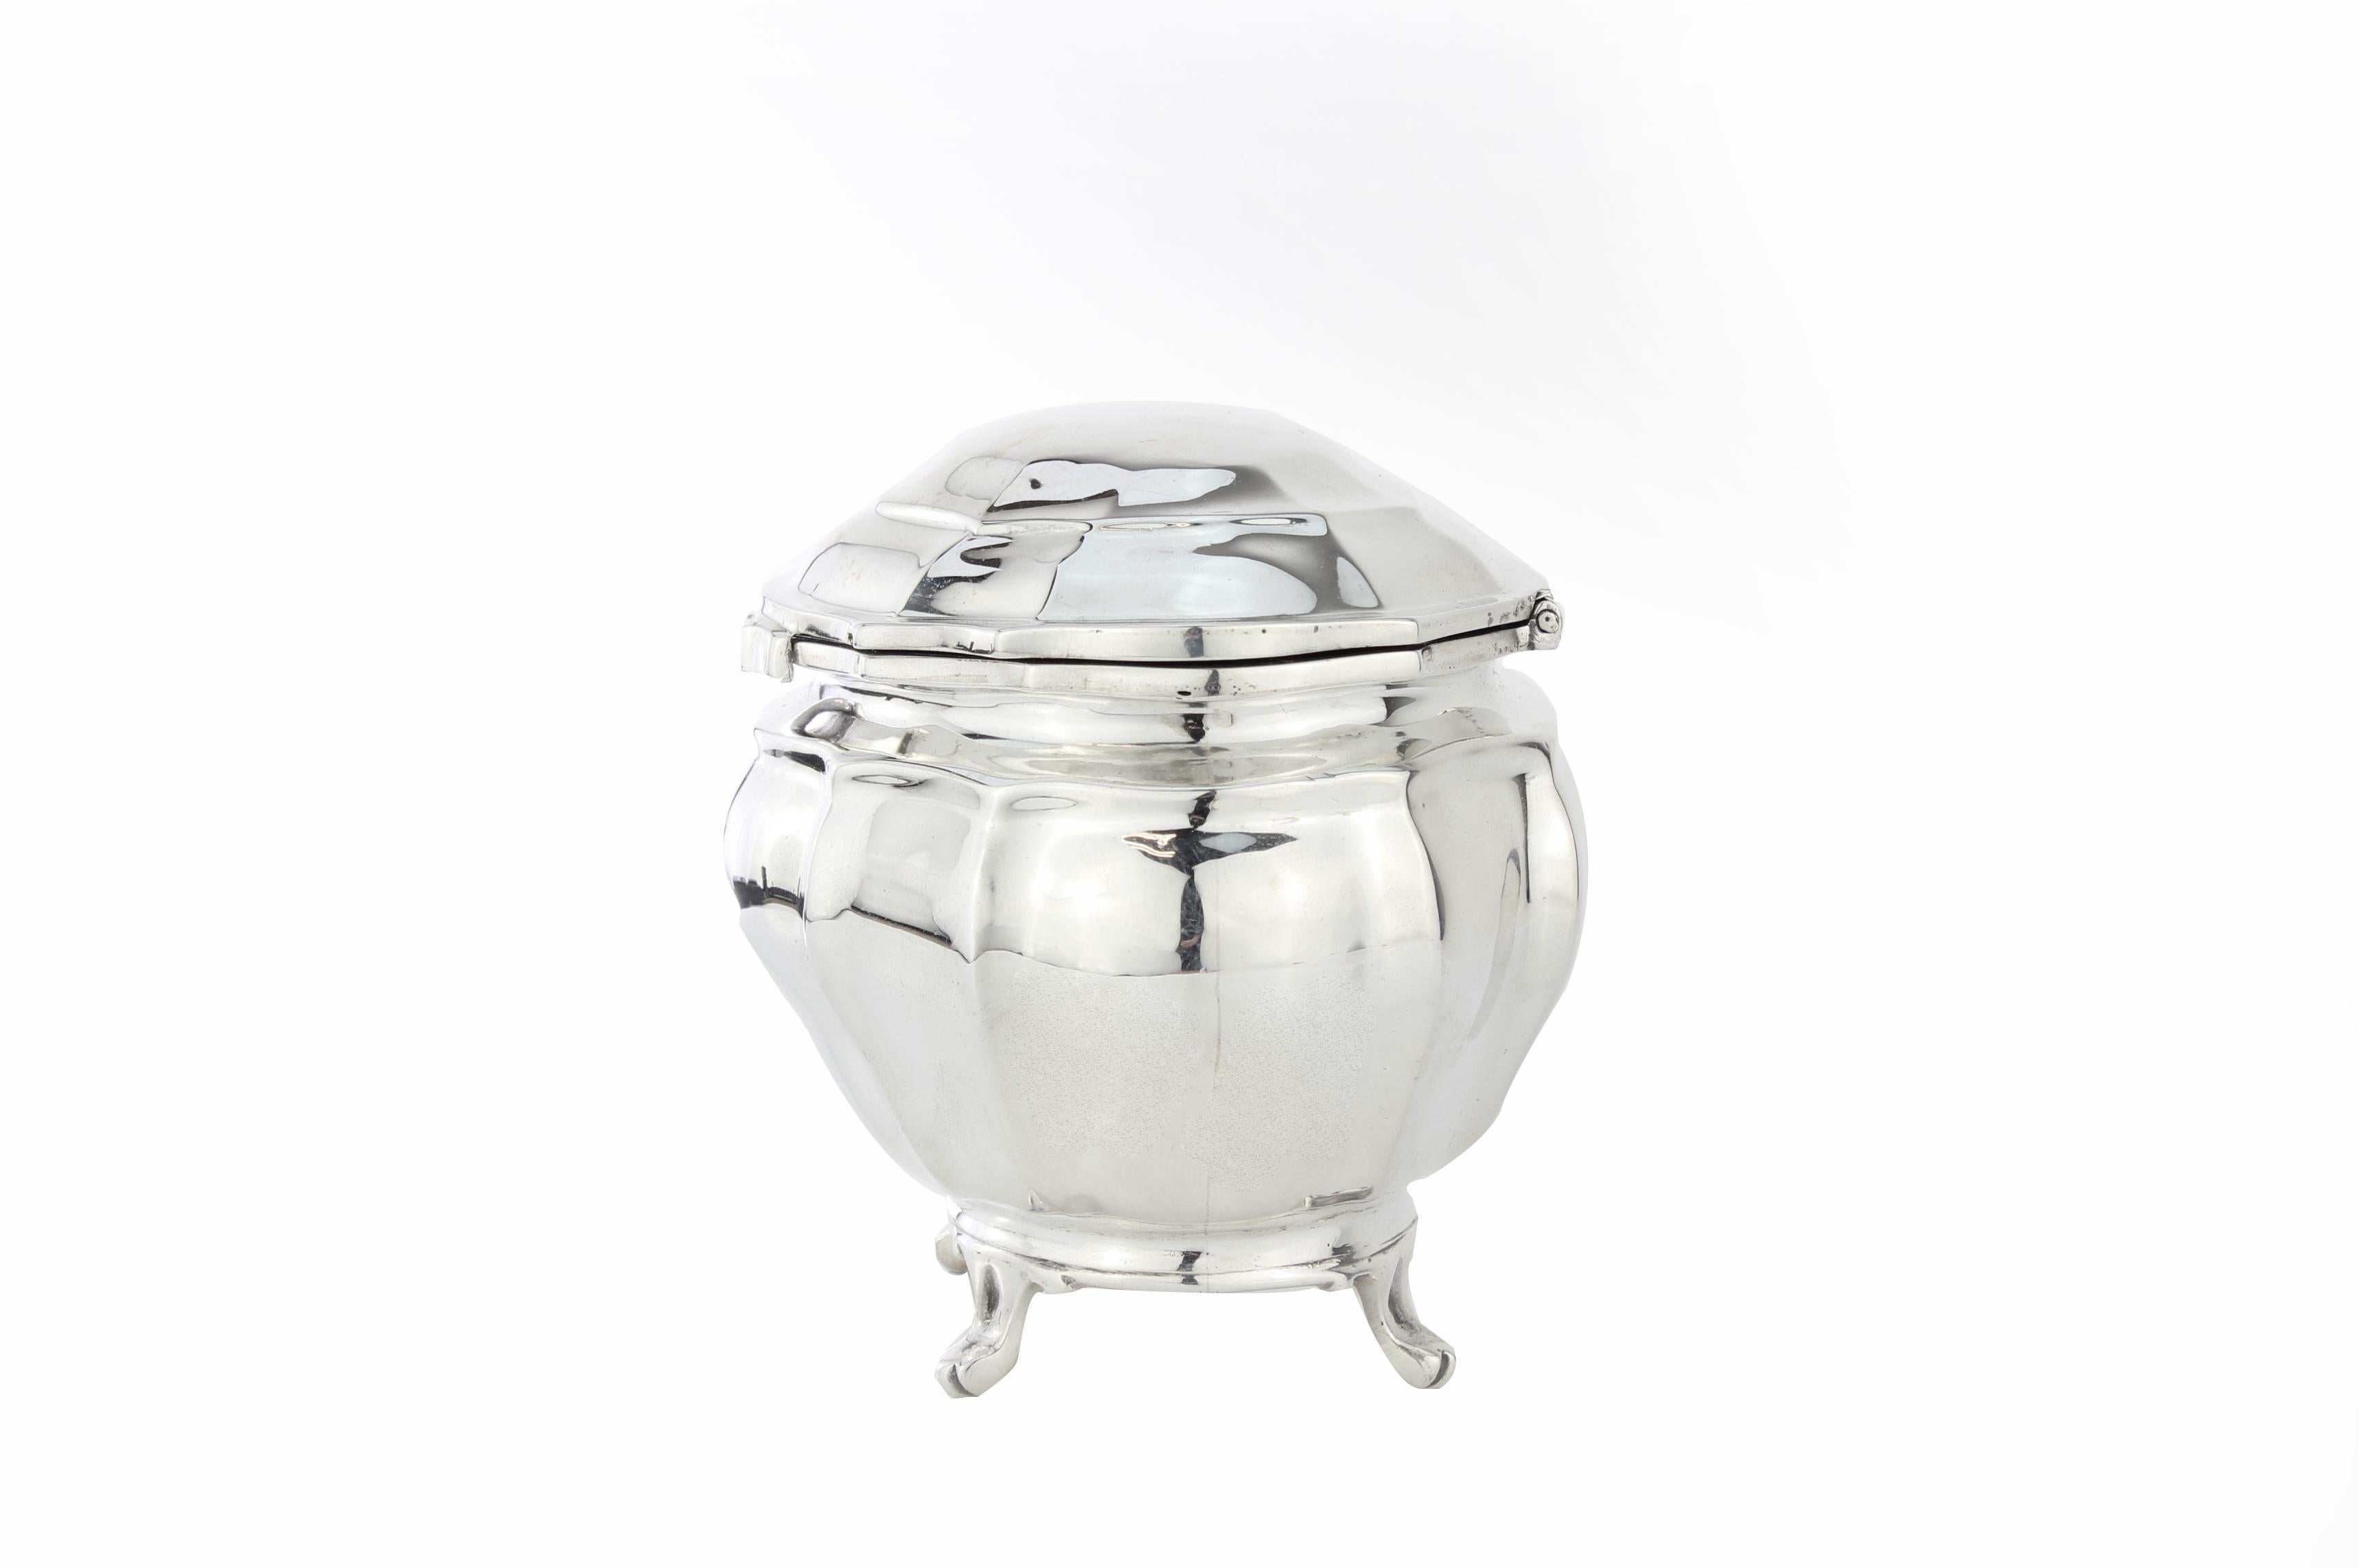 Antique Edwardian sterling silver tea caddy 

Maker: Goldsmiths & Silversmiths Co Ltd
Made in London, 1904
Fully hallmarked.

Dimensions - 
11 x 7.5 x 7.5 cm 
Weight: 173 grams

The firm was established in 1880 by William Gibson (d. 1913)